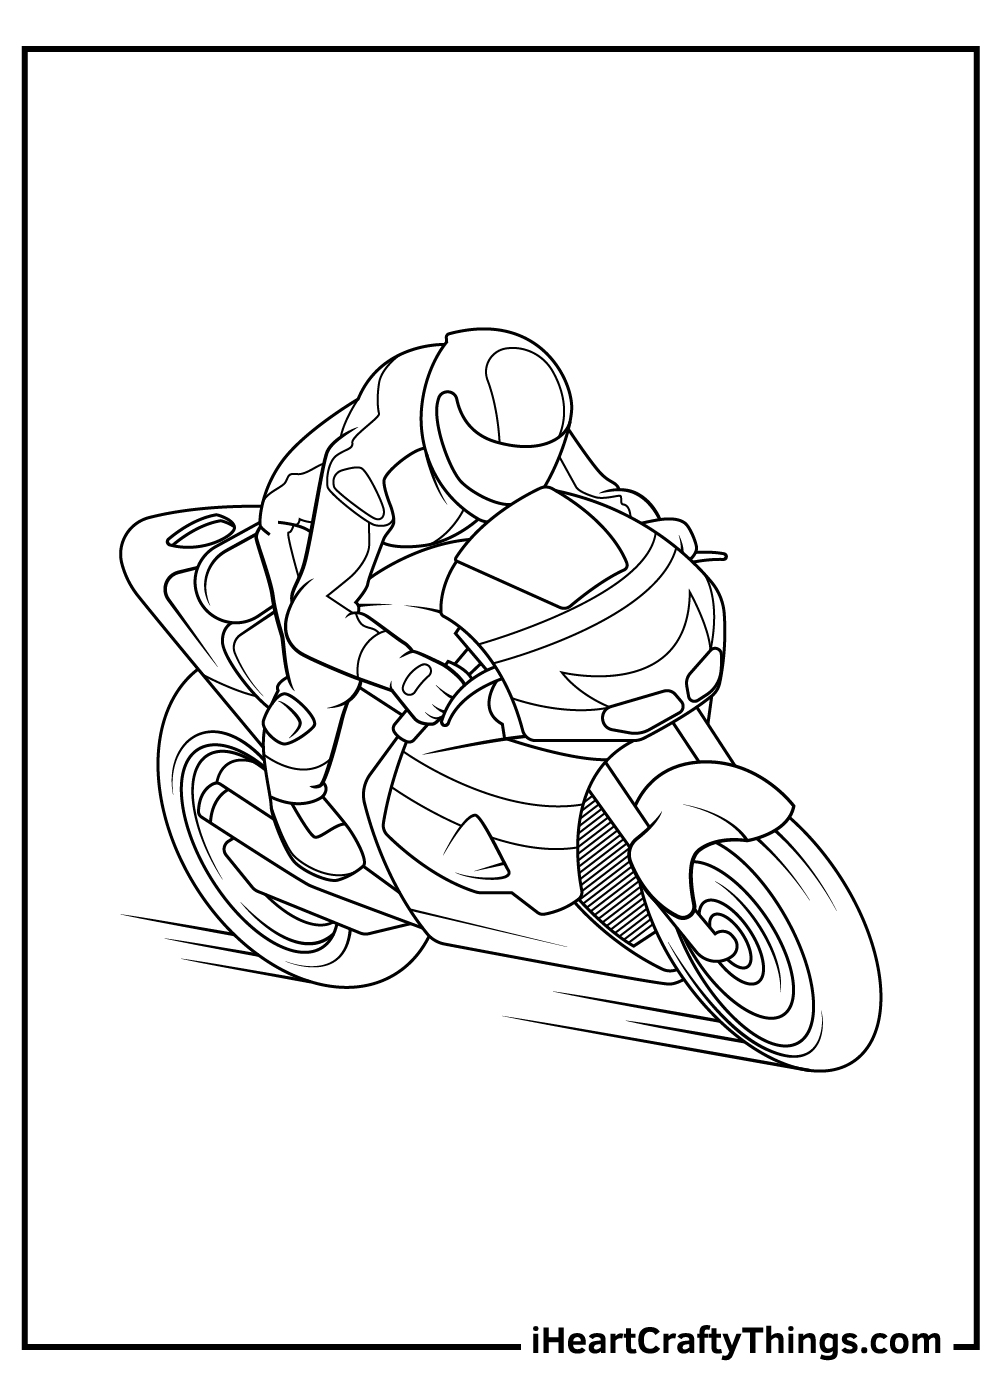 motorcycle coloring pages realistic